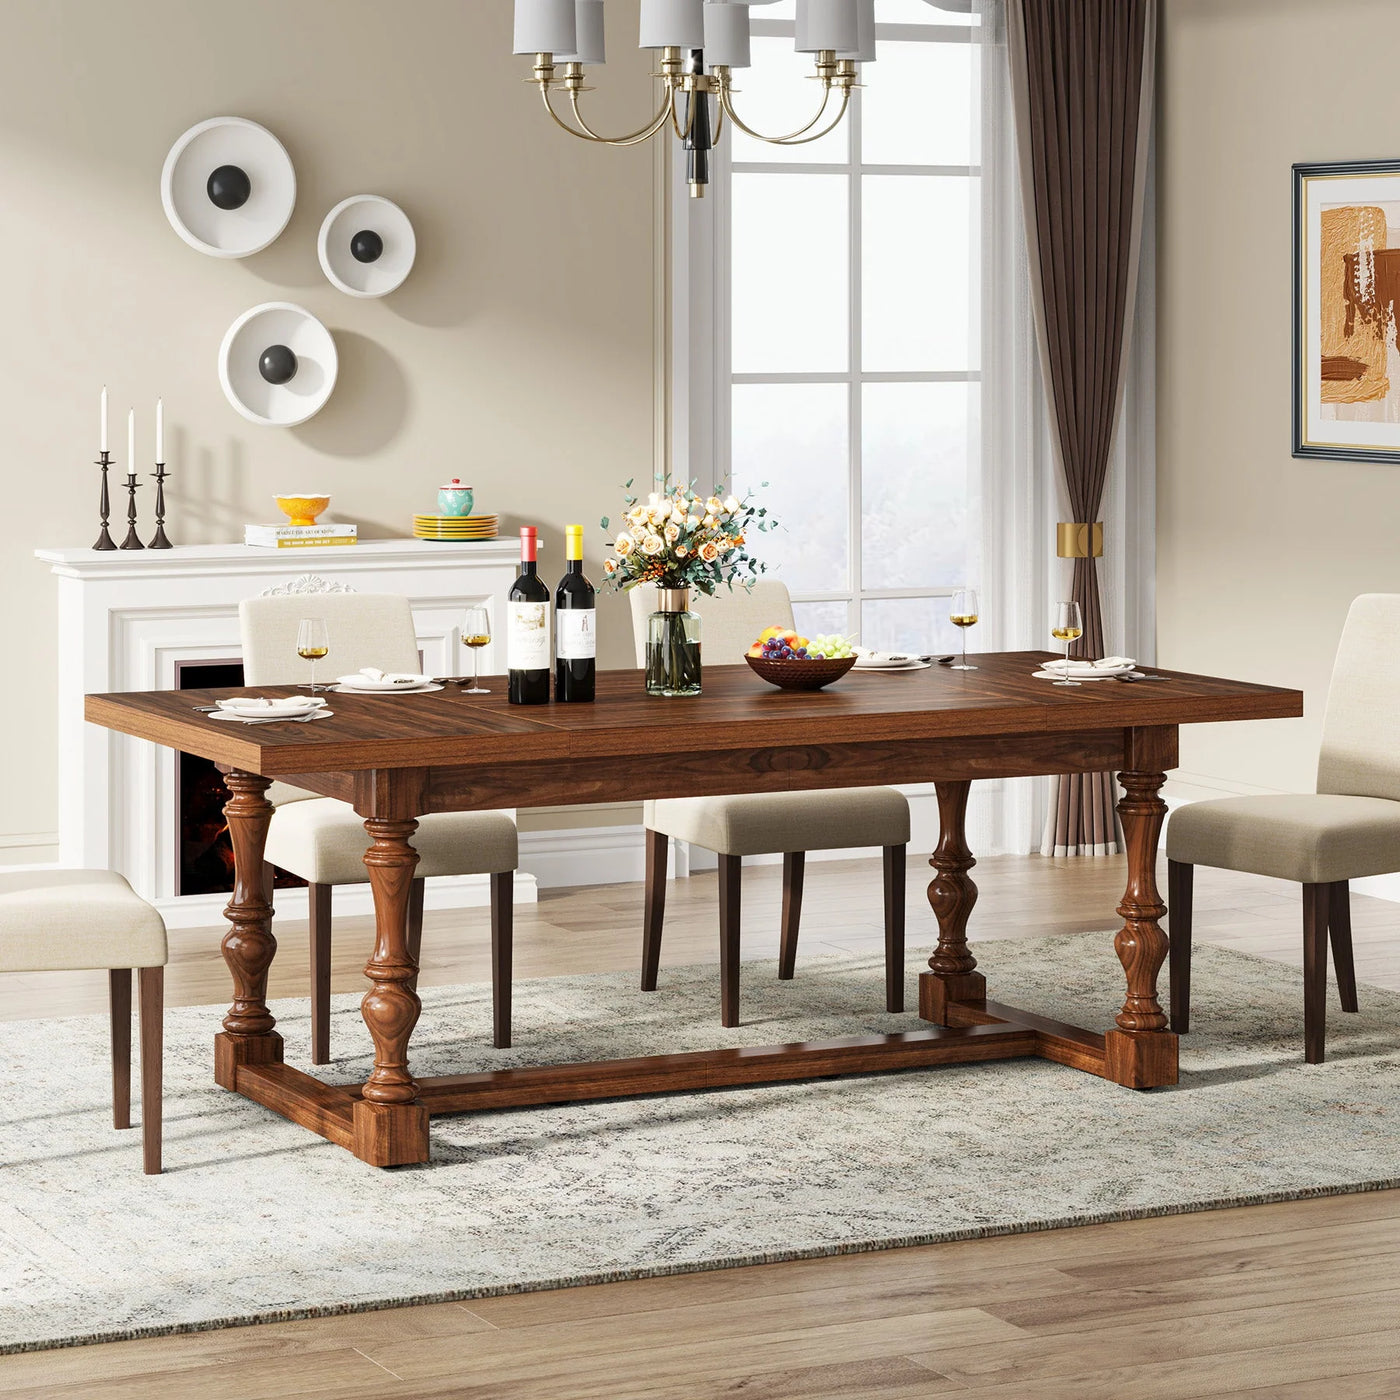 Belize Rectangular Dining Table Kitchen Table with Solid Wood Legs for 8 People